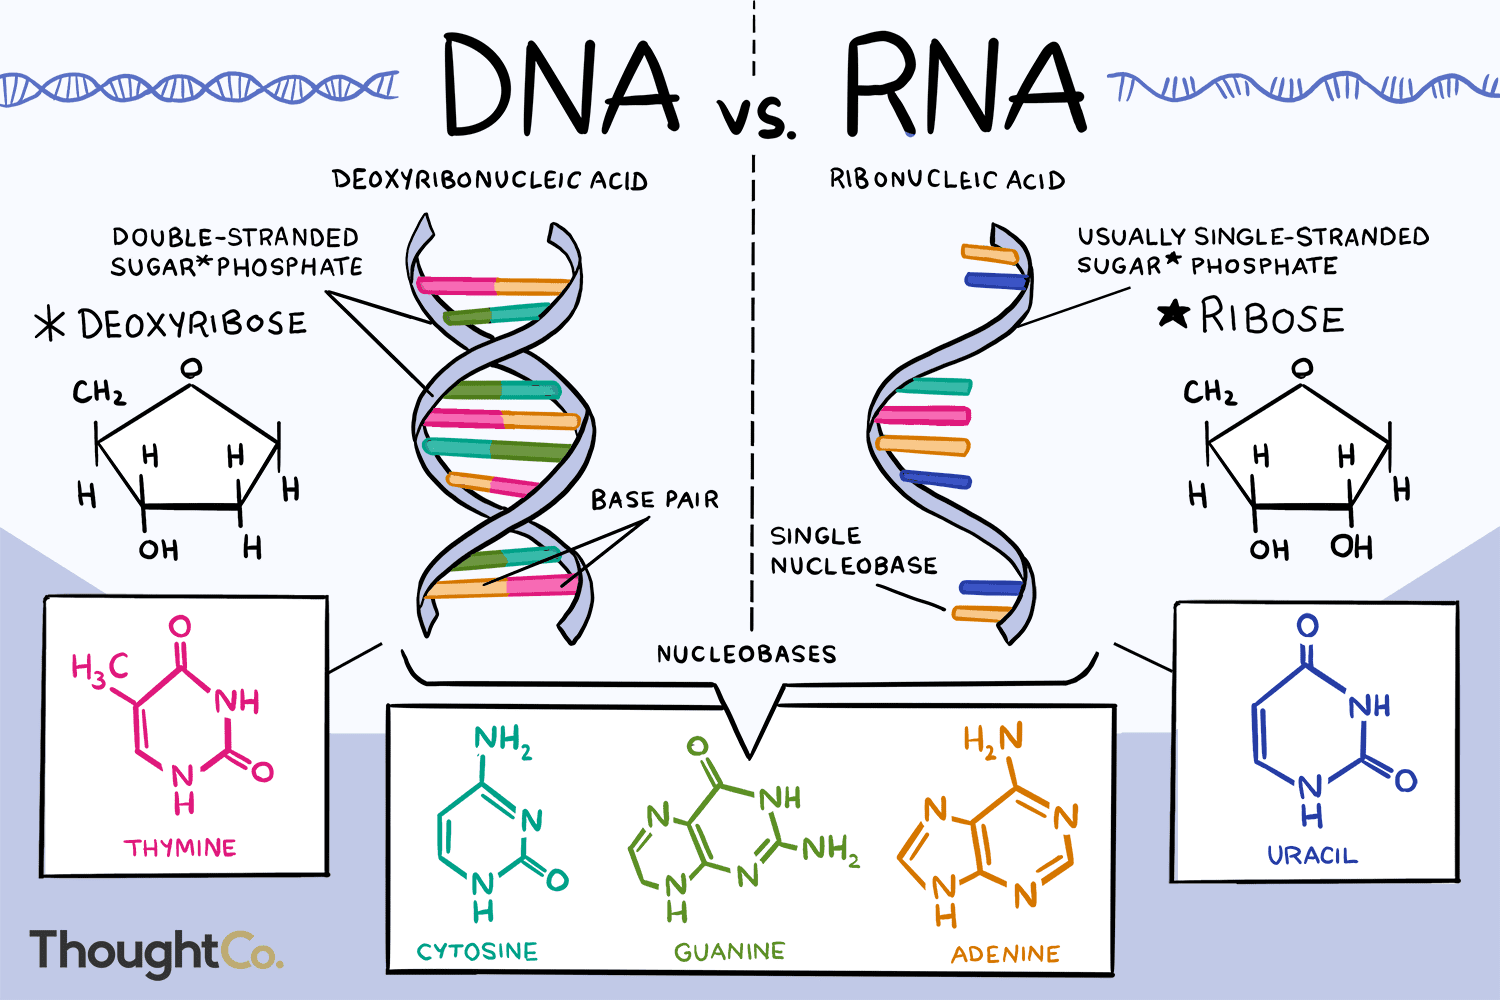 <p>Both are nucleic acids formed through condensation of nucleotides. Both DNA and RNA have a sugar-phosphate backbone.<br><br><strong>RNA</strong><br>ribose<br>single stranded<br>nitrogenous bases A, G, C, U<br>Complementary paring A-U, C-G<br><br><strong>DNA</strong><br>deoxyribose<br>double stranded<br>nitrogenous bases A, G, C, T<br>Complementary pairing A-T, C-G</p>